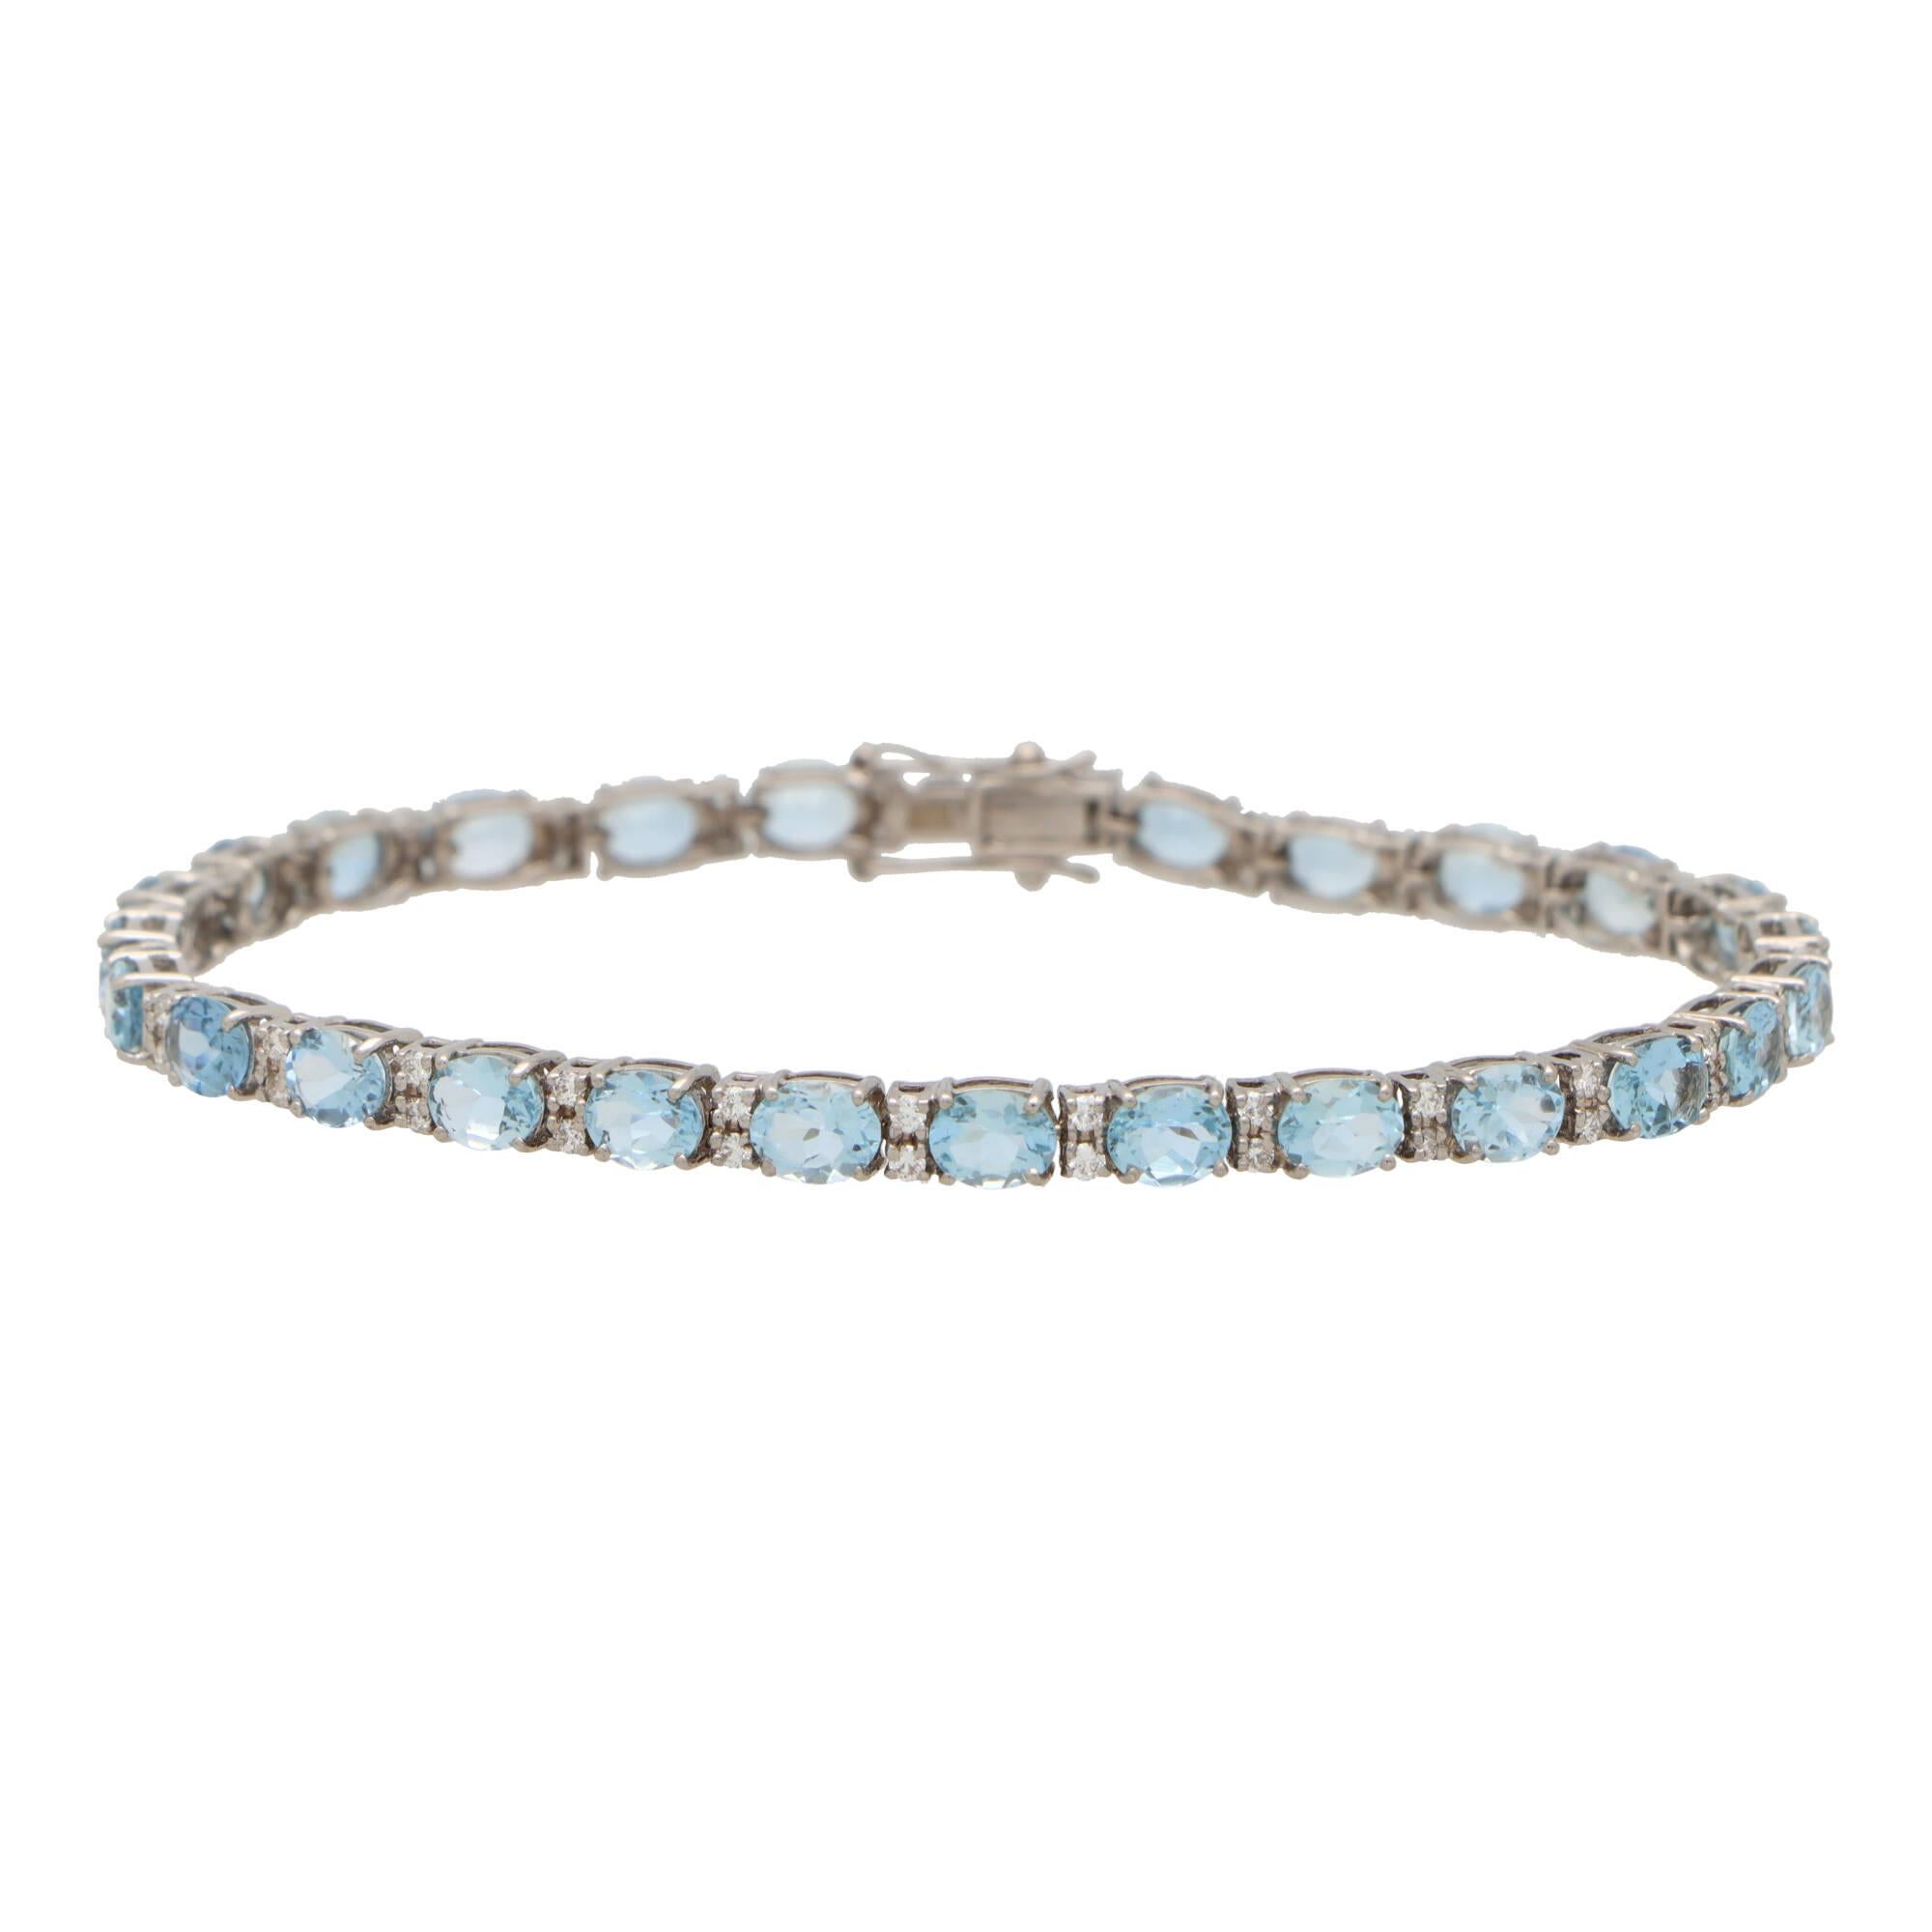 Modern Contemporary Diamond and Aquamarine Bracelet in 18k White Gold For Sale